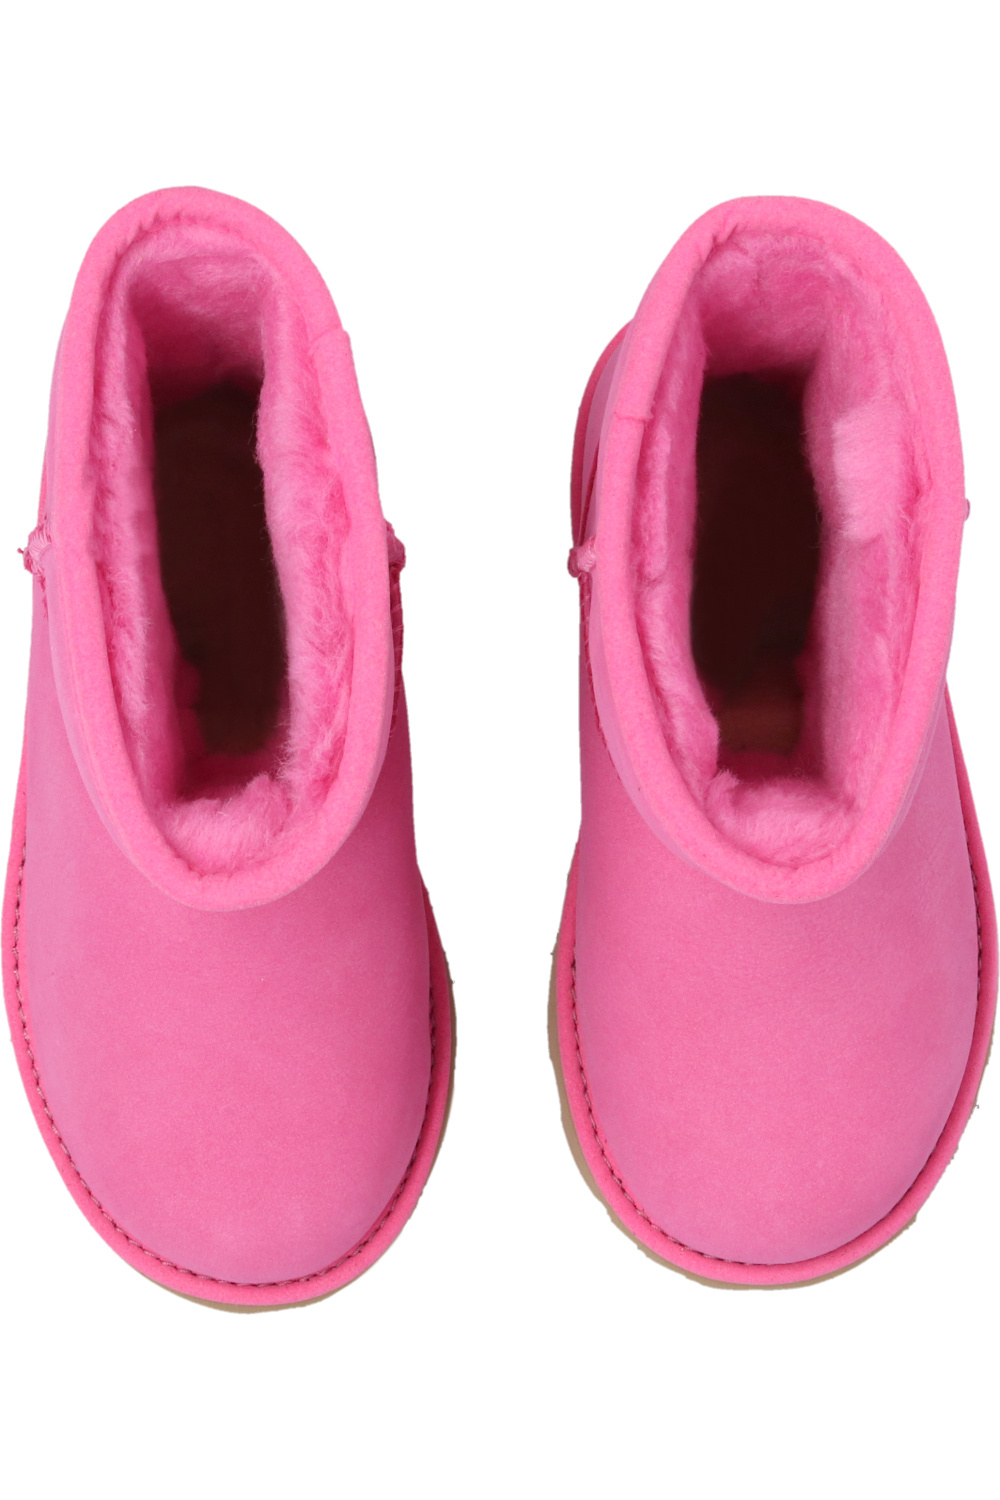 ugg Gaila Kids ‘Classic Weather Short’ snow boots